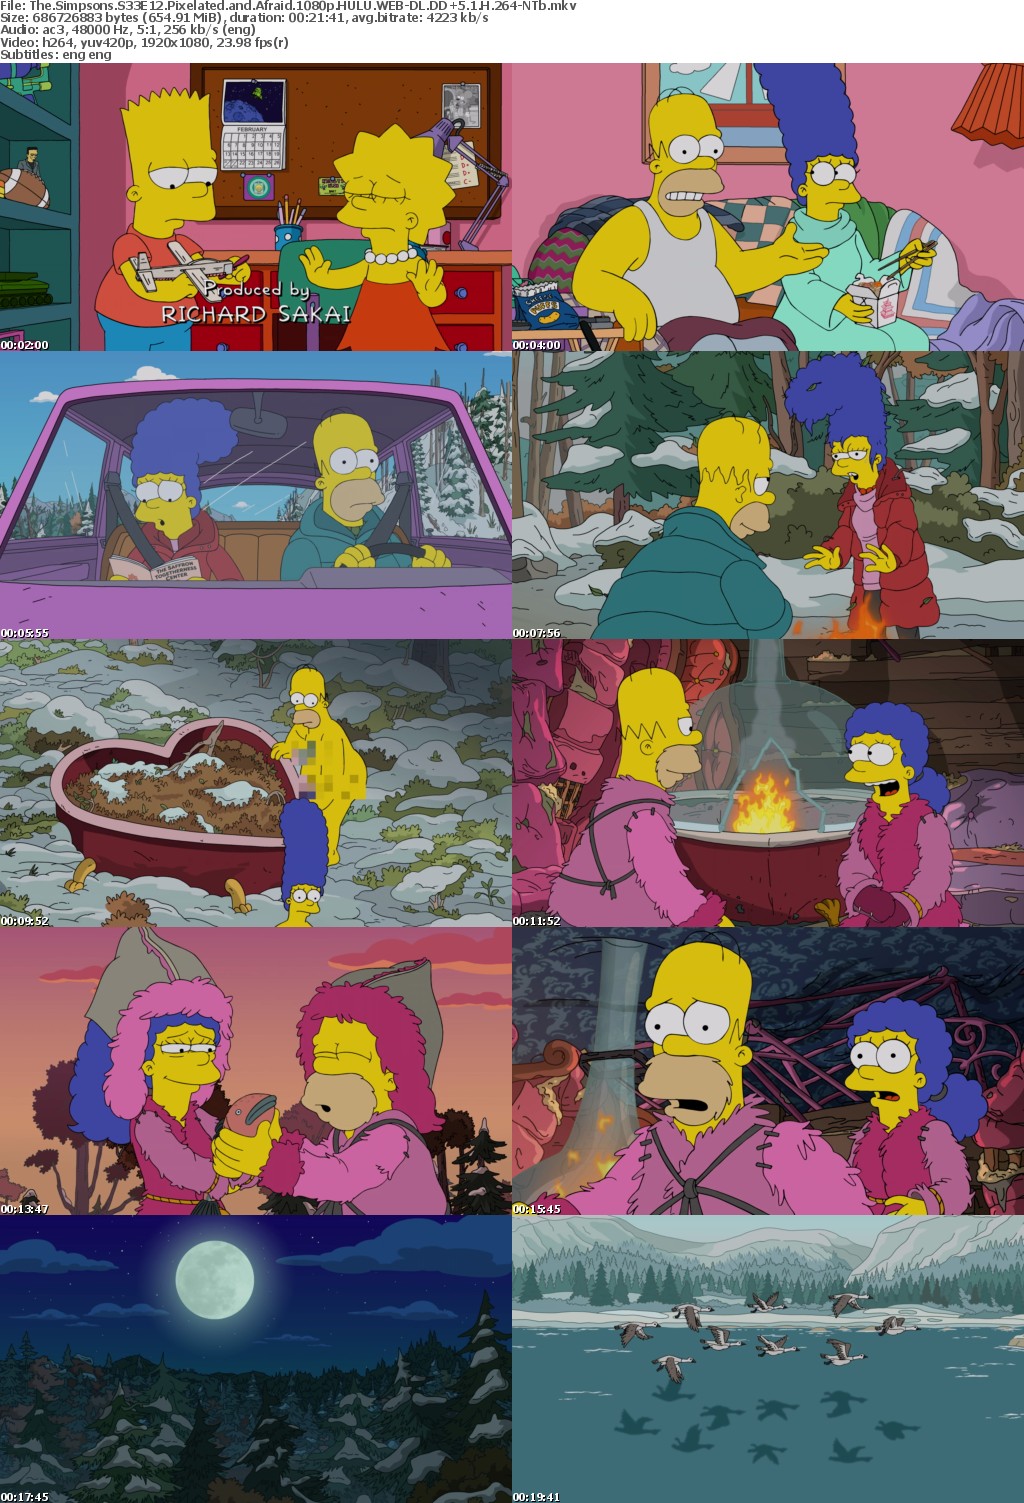 The Simpsons S33E12 Pixelated and Afraid 1080p HULU WEBRip DDP5 1 x264-NTb